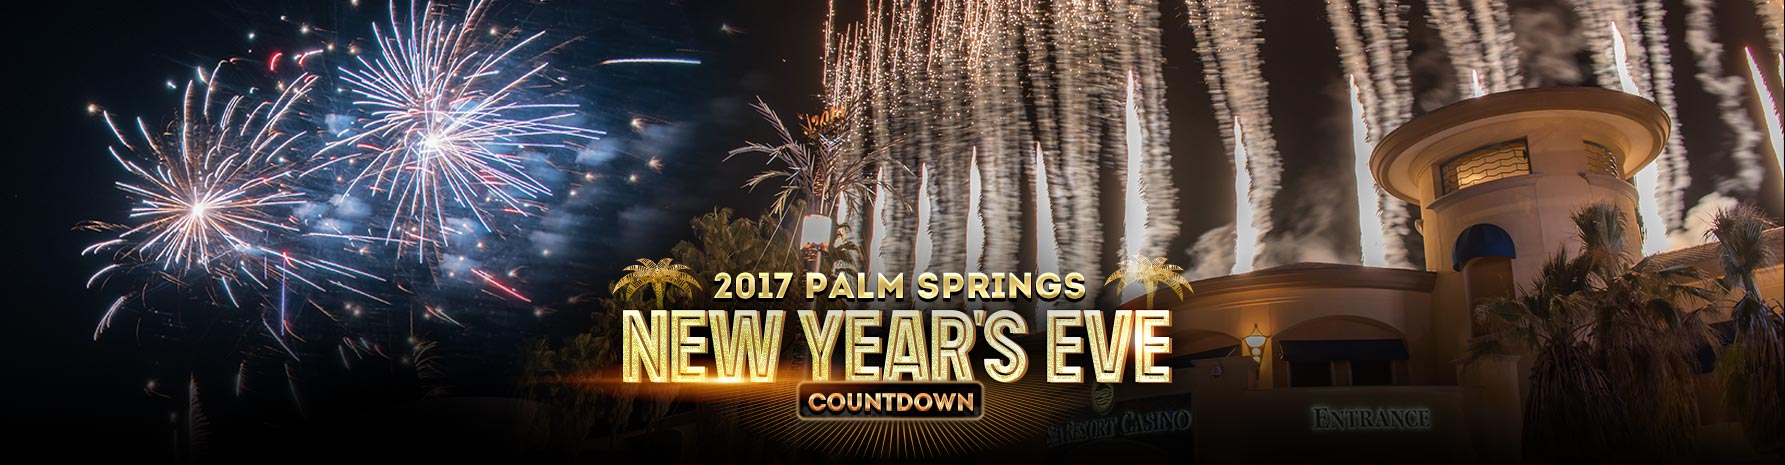 New Year's Eve Events in Greater Palm Springs